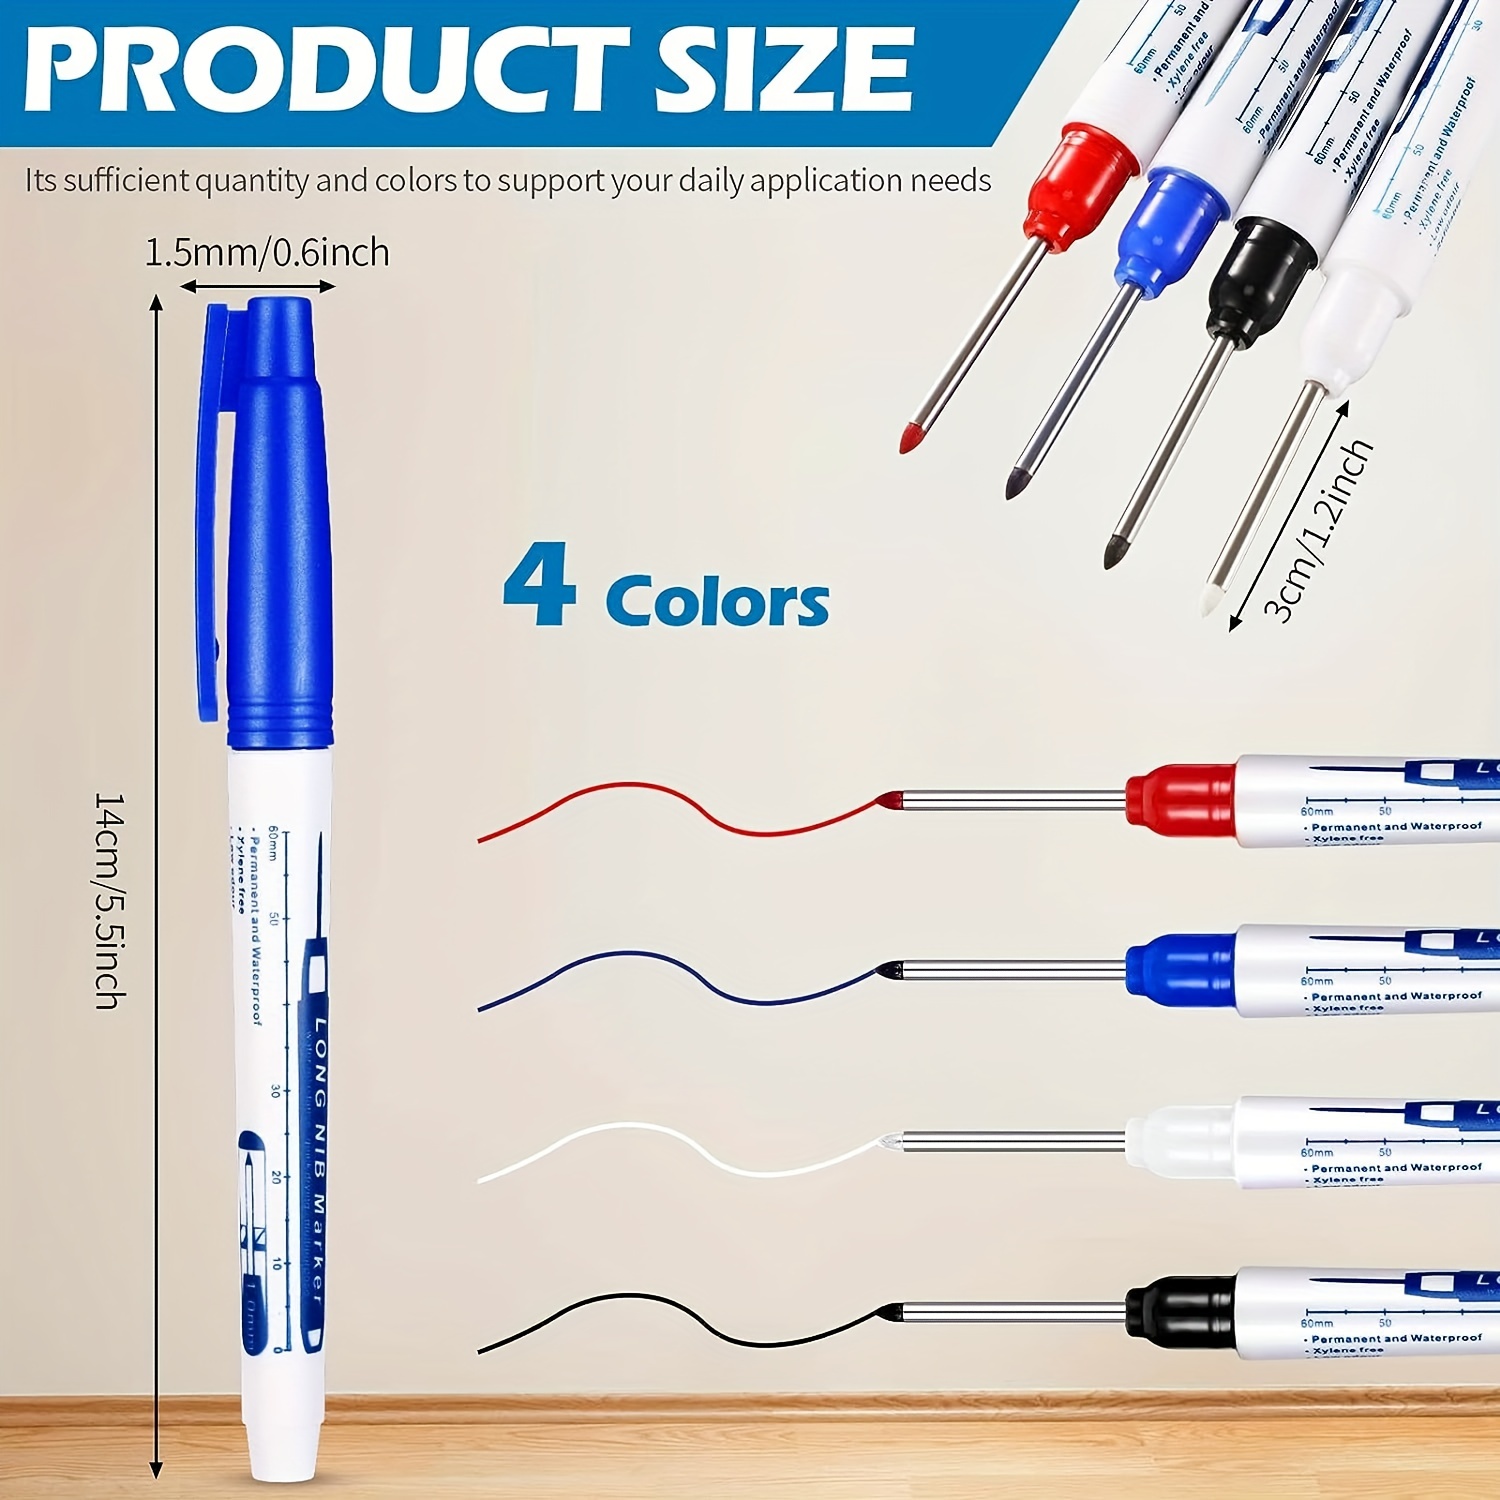 Multi-Purpose Deep Drill Hole Long Nib Waterproof Marker Pens Colorful  Carpenter Pen for Bathroom Woodworking, Red Black Blue (20 mm, Classic  Style)